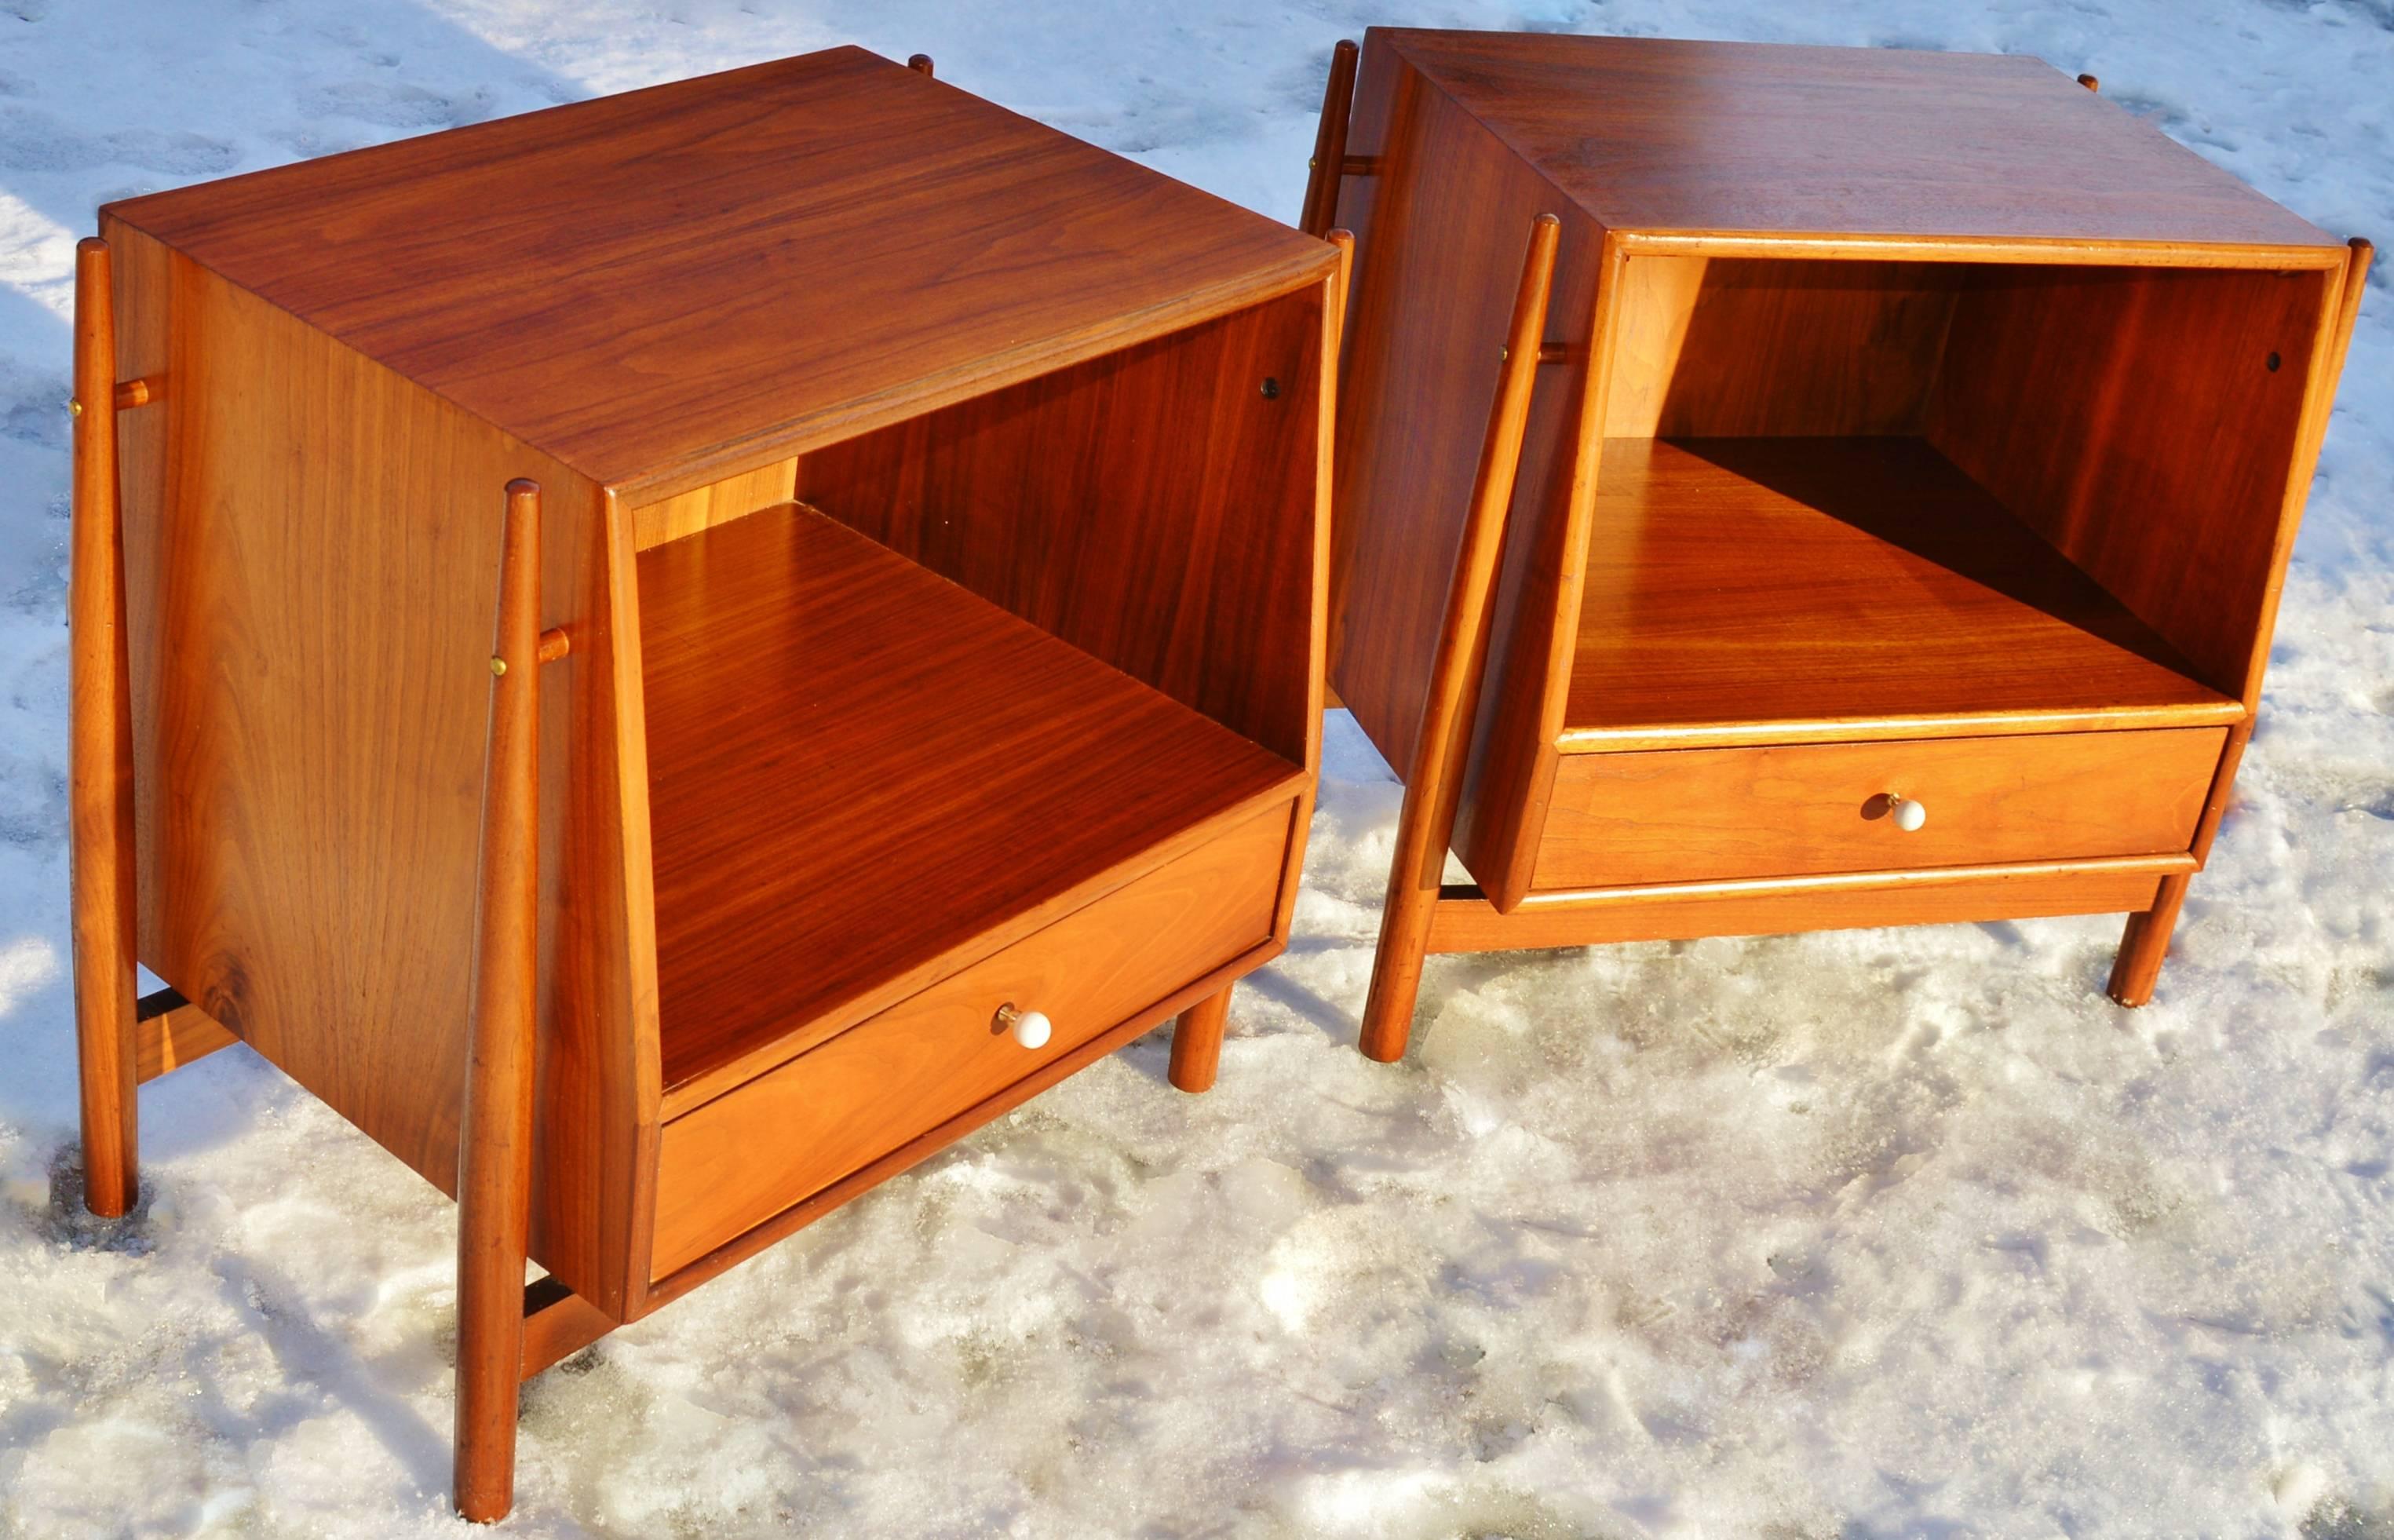 These walnut side tables or nightstands are the most coveted of the Drexel Declaration line by Kipp Stewart and Stewart MacDougall in the 1950s. Featuring the exposed exoskeleton structure that supports the floating cabinets that have angled fronts,